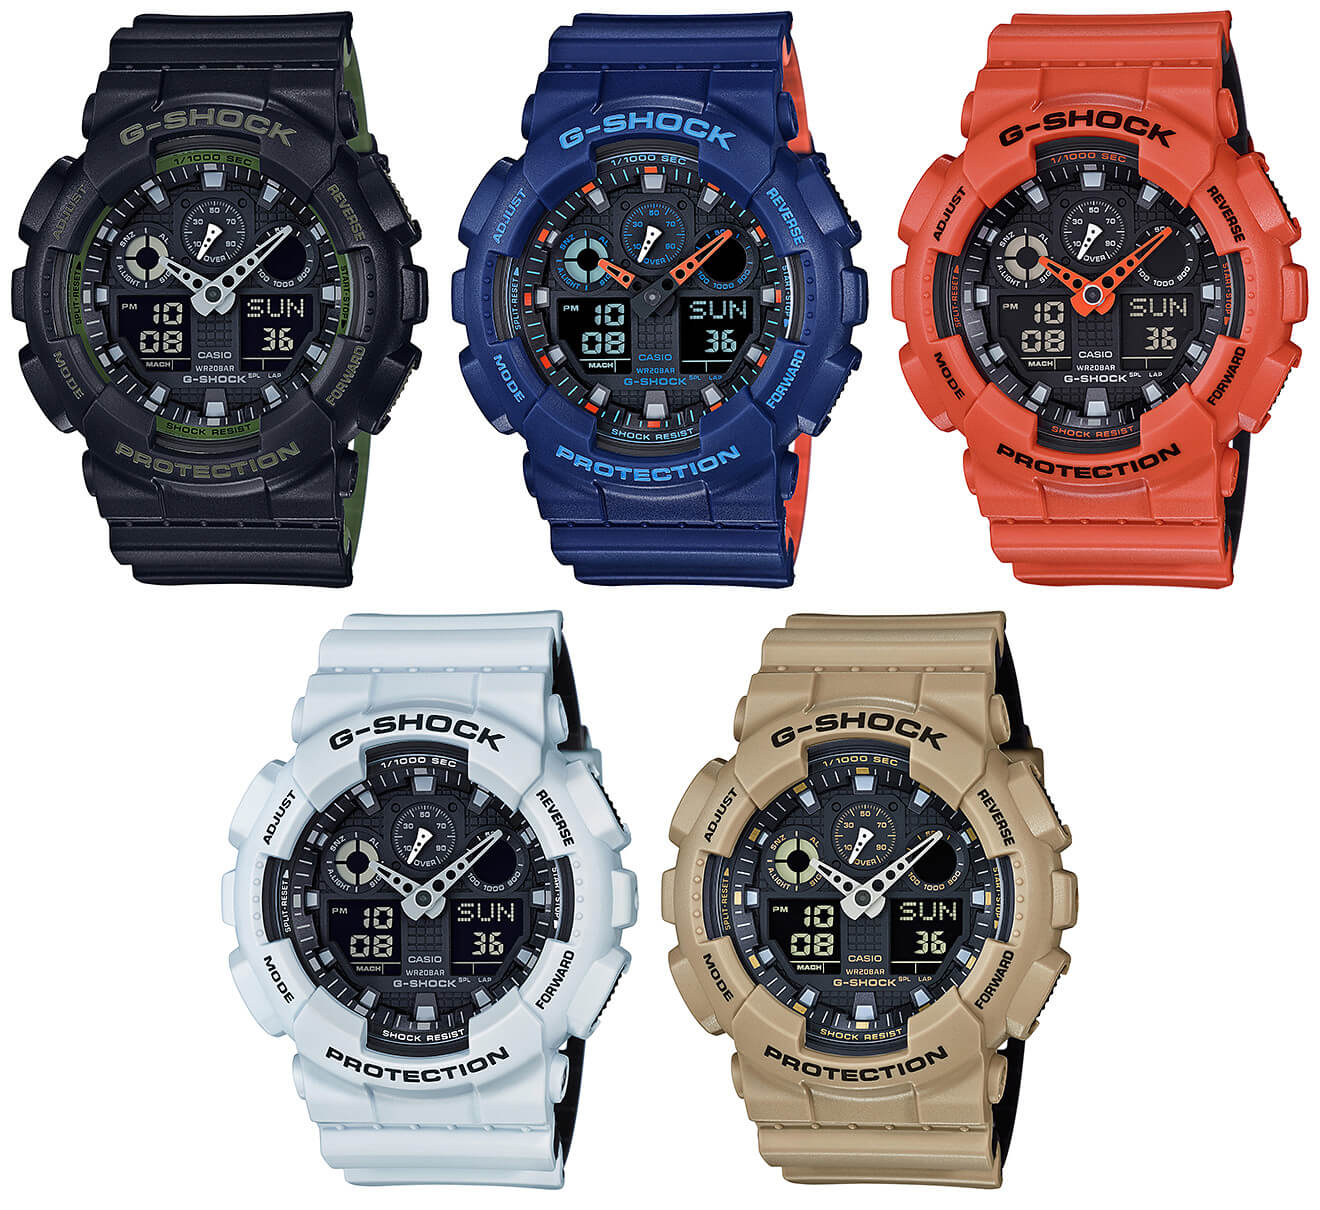 Casio G-Shock GA-100 Review & Complete Guide - Millenary Watches